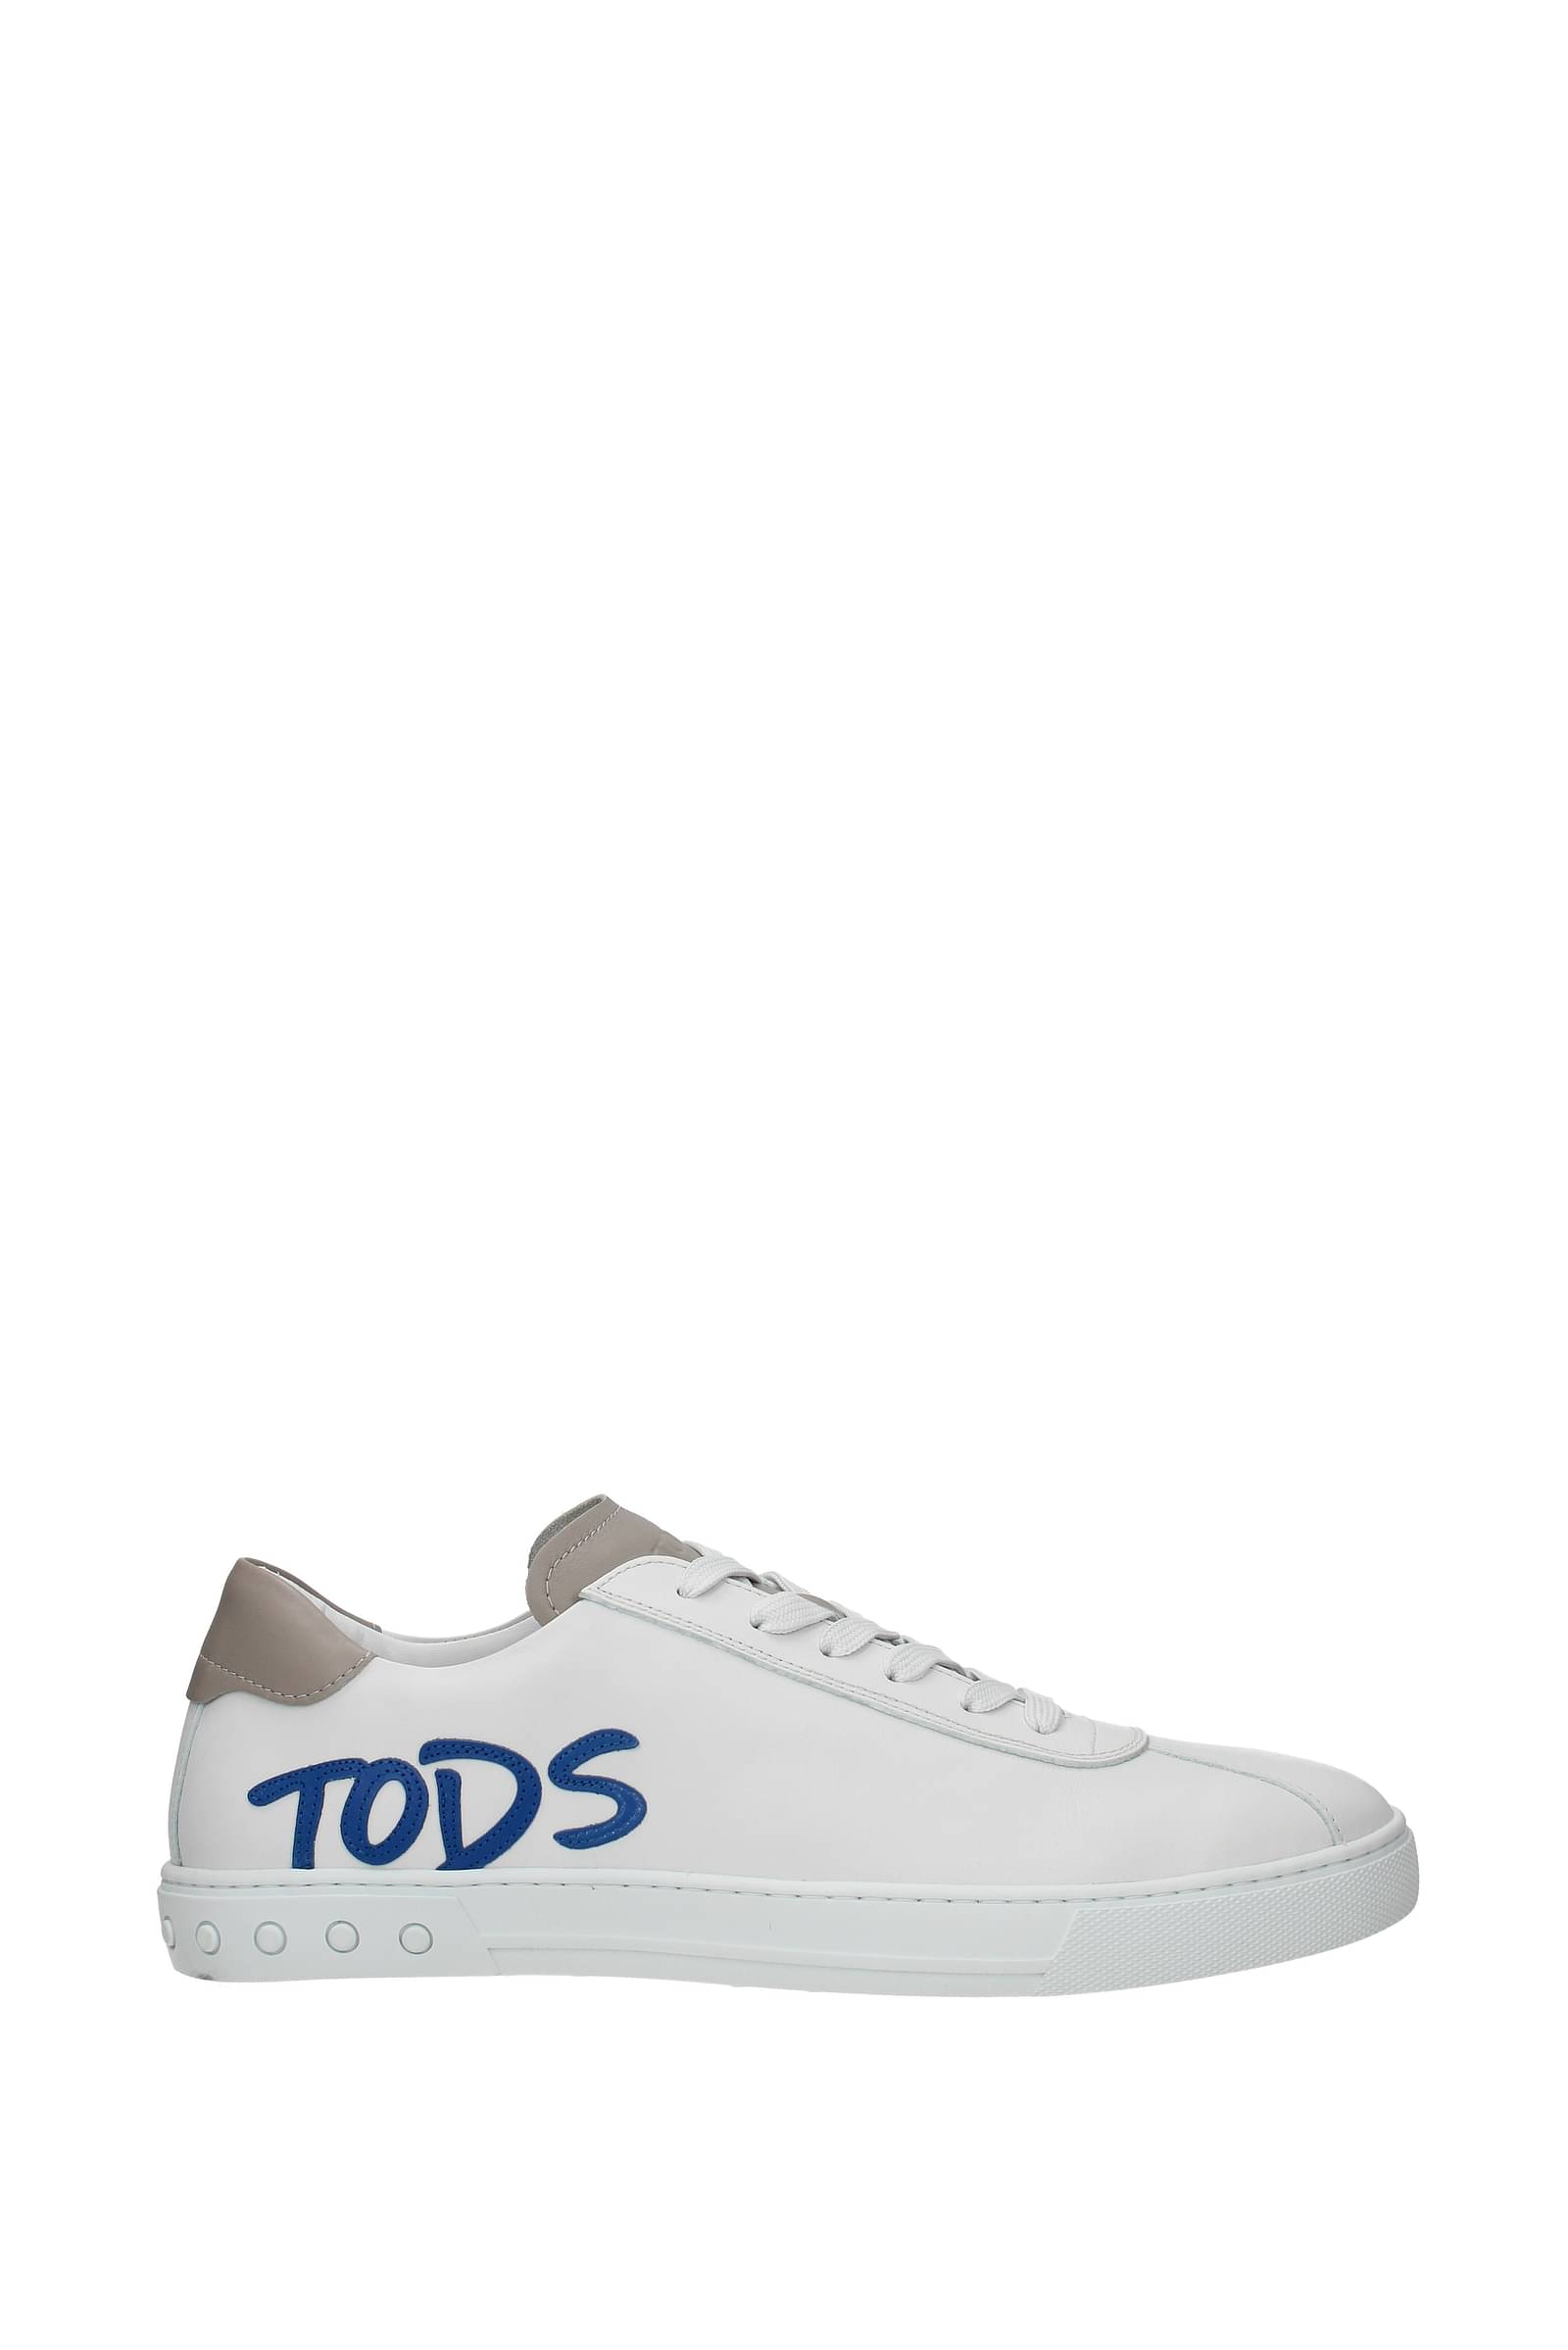 tods sneakers outlet